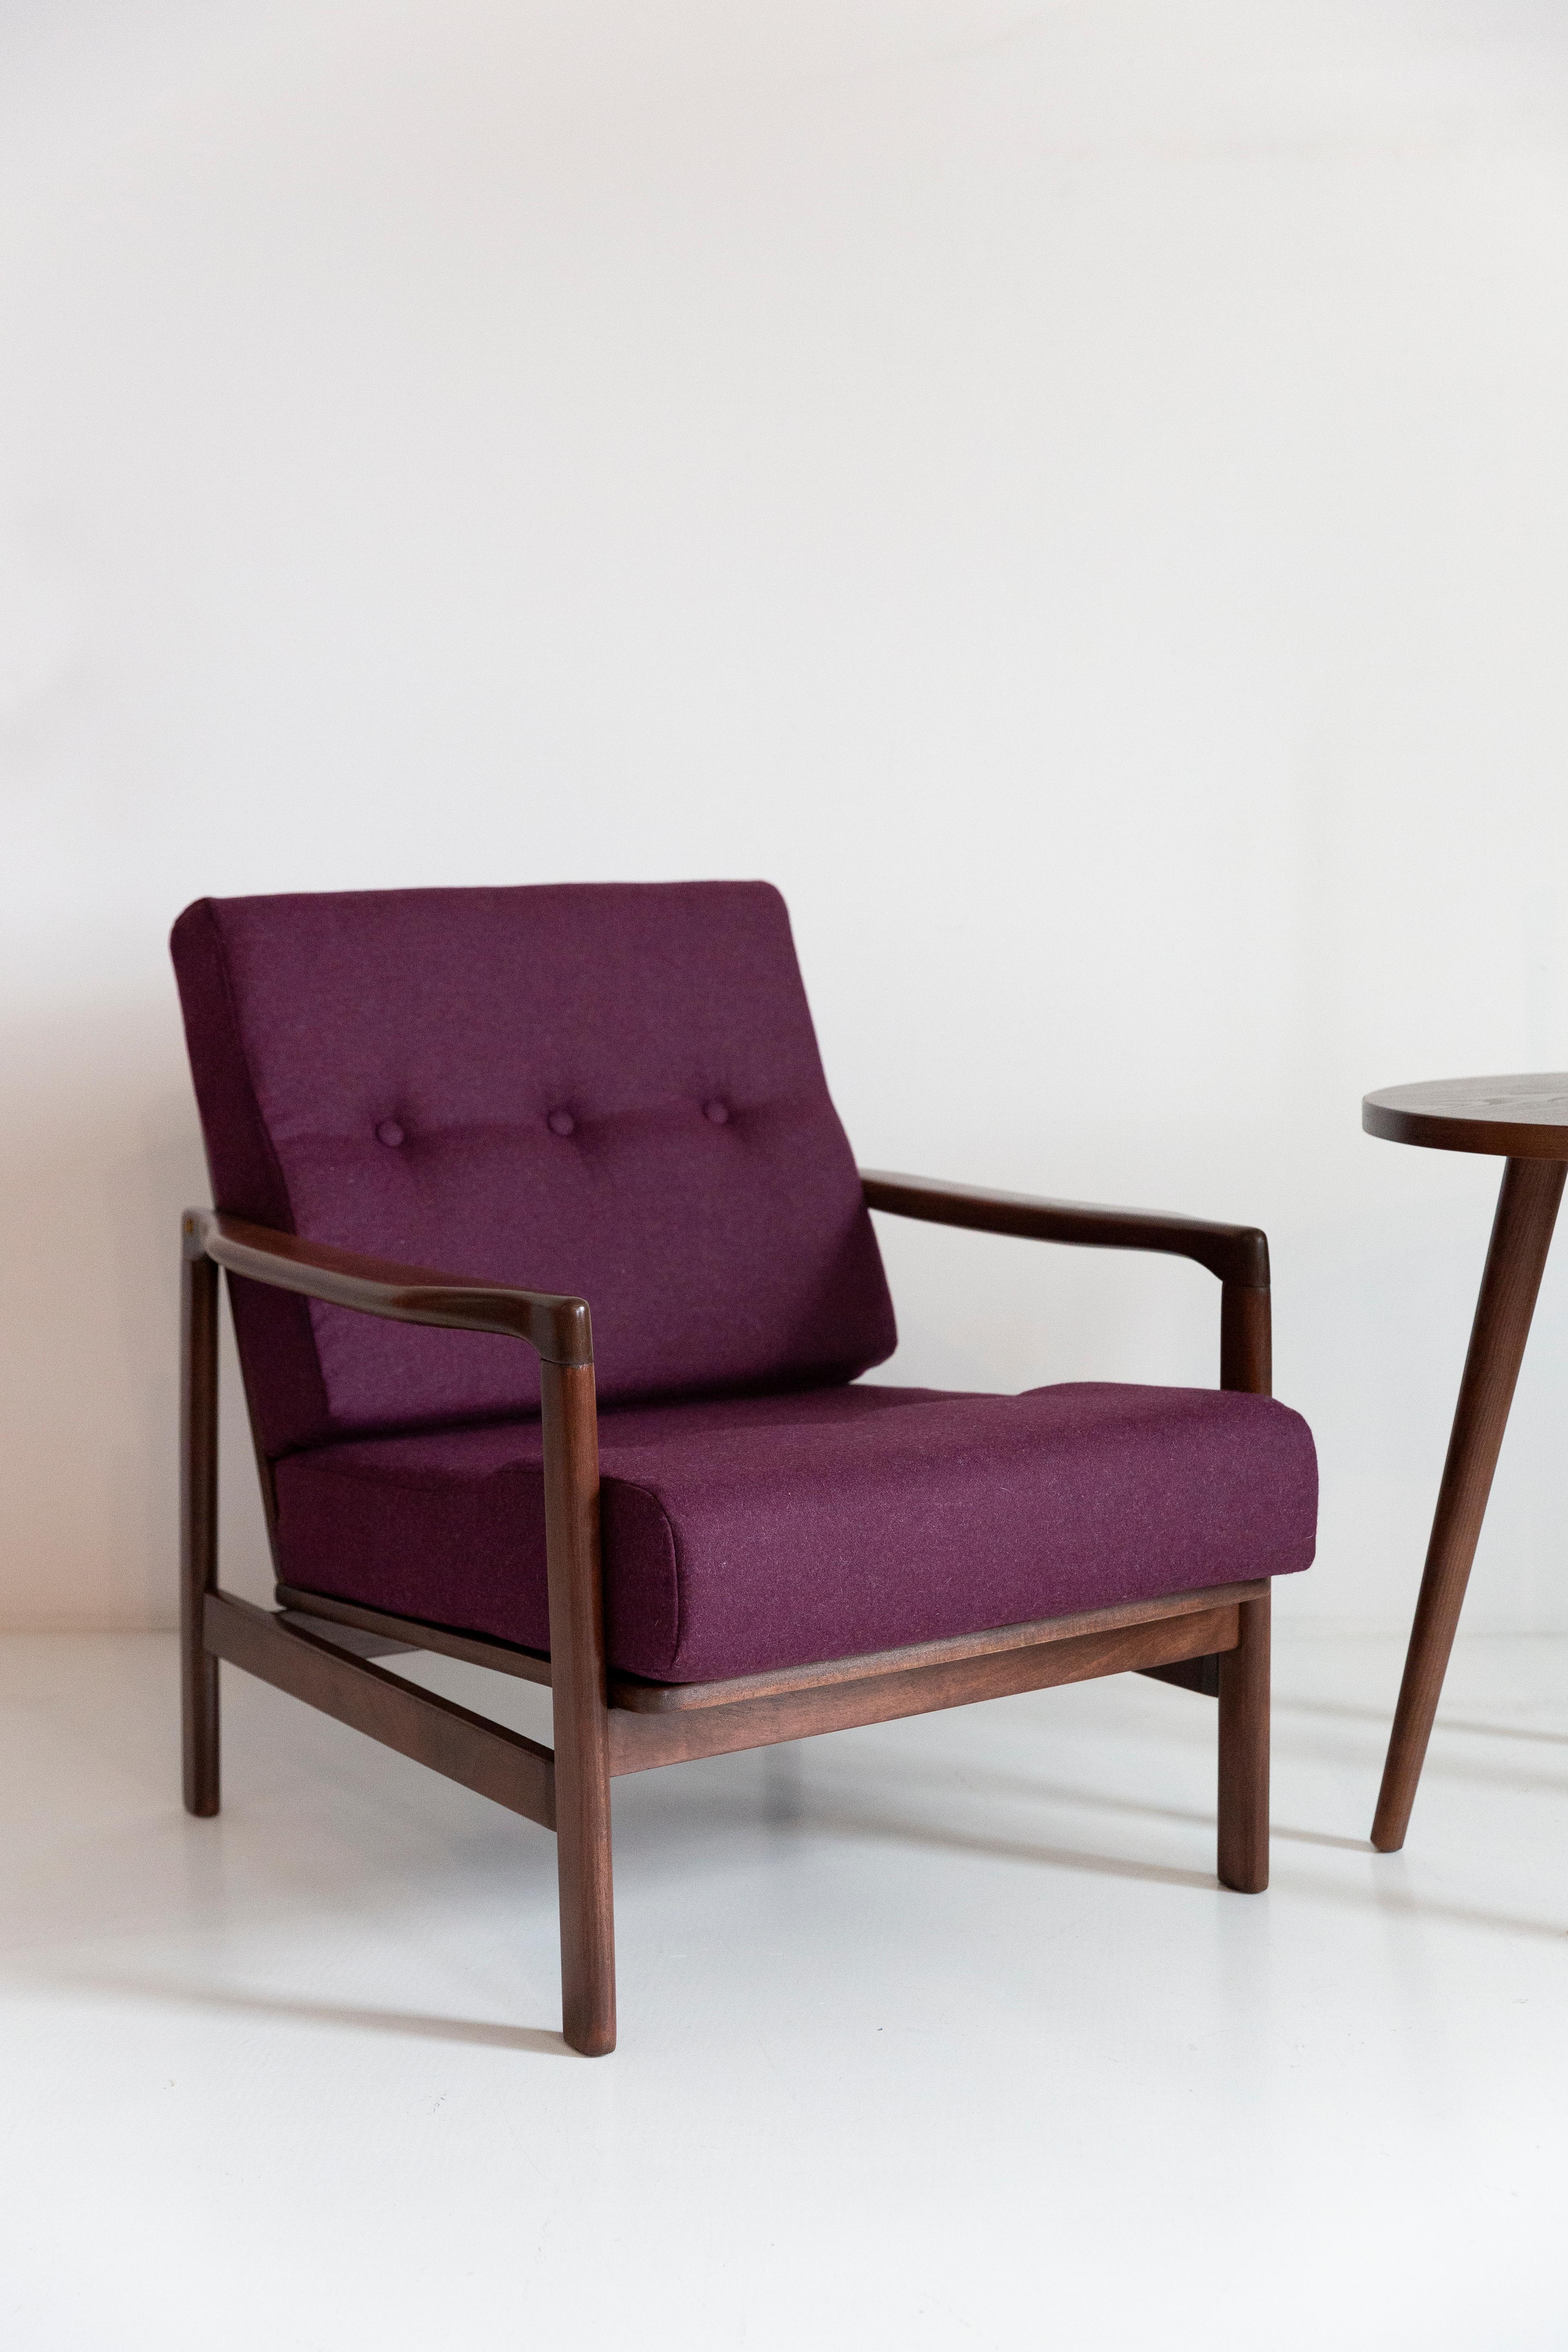 The B-7522 armchairs was designed in the 1960s by Zenon Baczyk, it was produced by Swarzedz furniture factories in Poland. This is original vintage armchair after renovation, they are not new! 

Furniture kept in perfect condition, after full